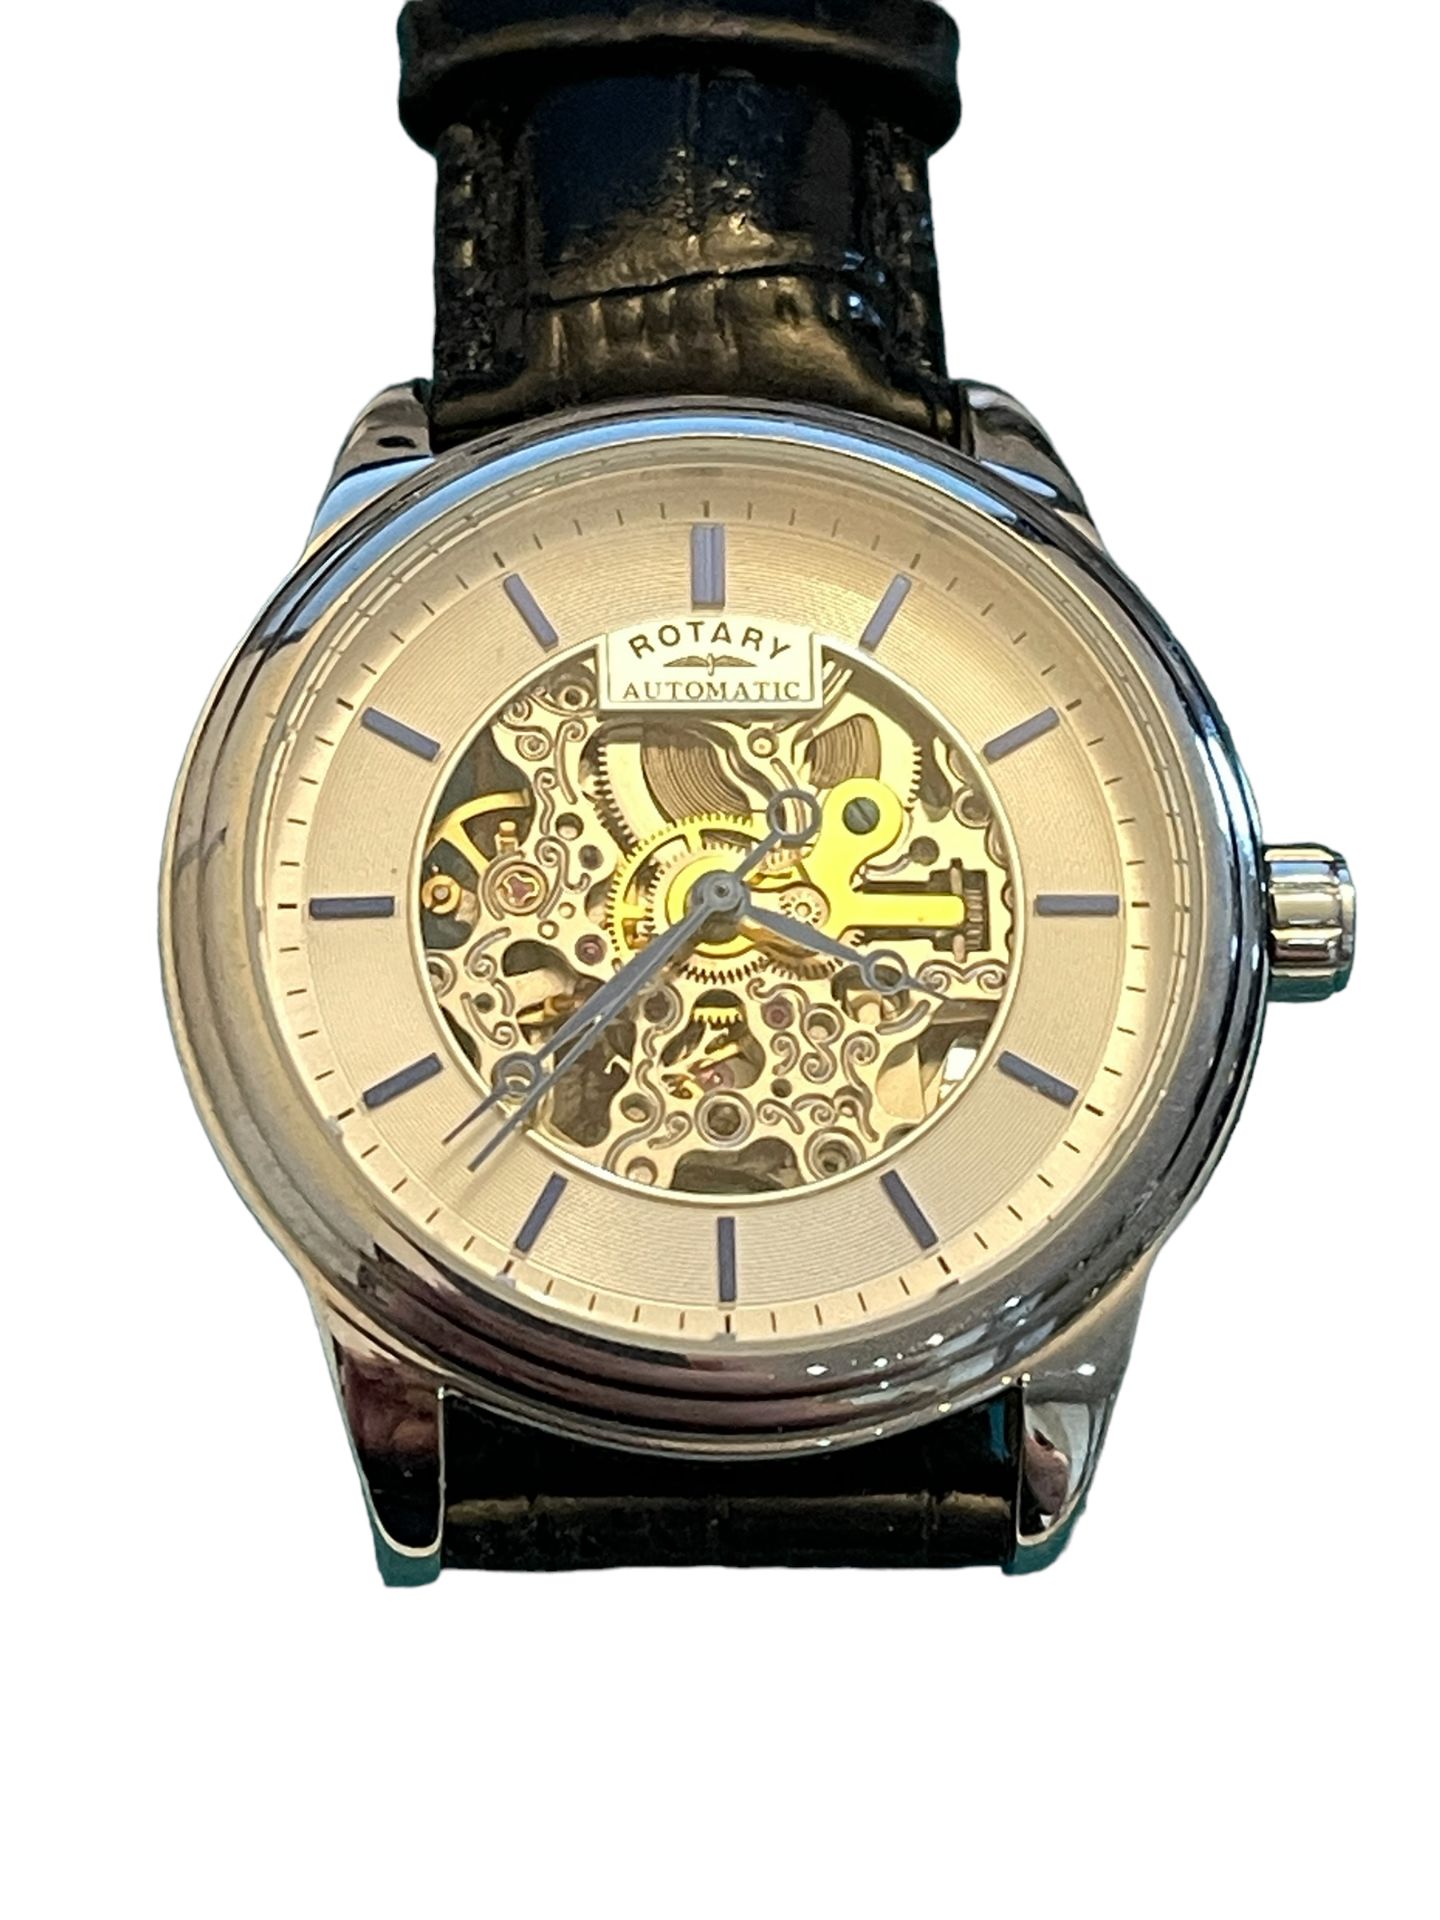 Men’s Rotary Automatic Skeleton Watch - Image 4 of 5